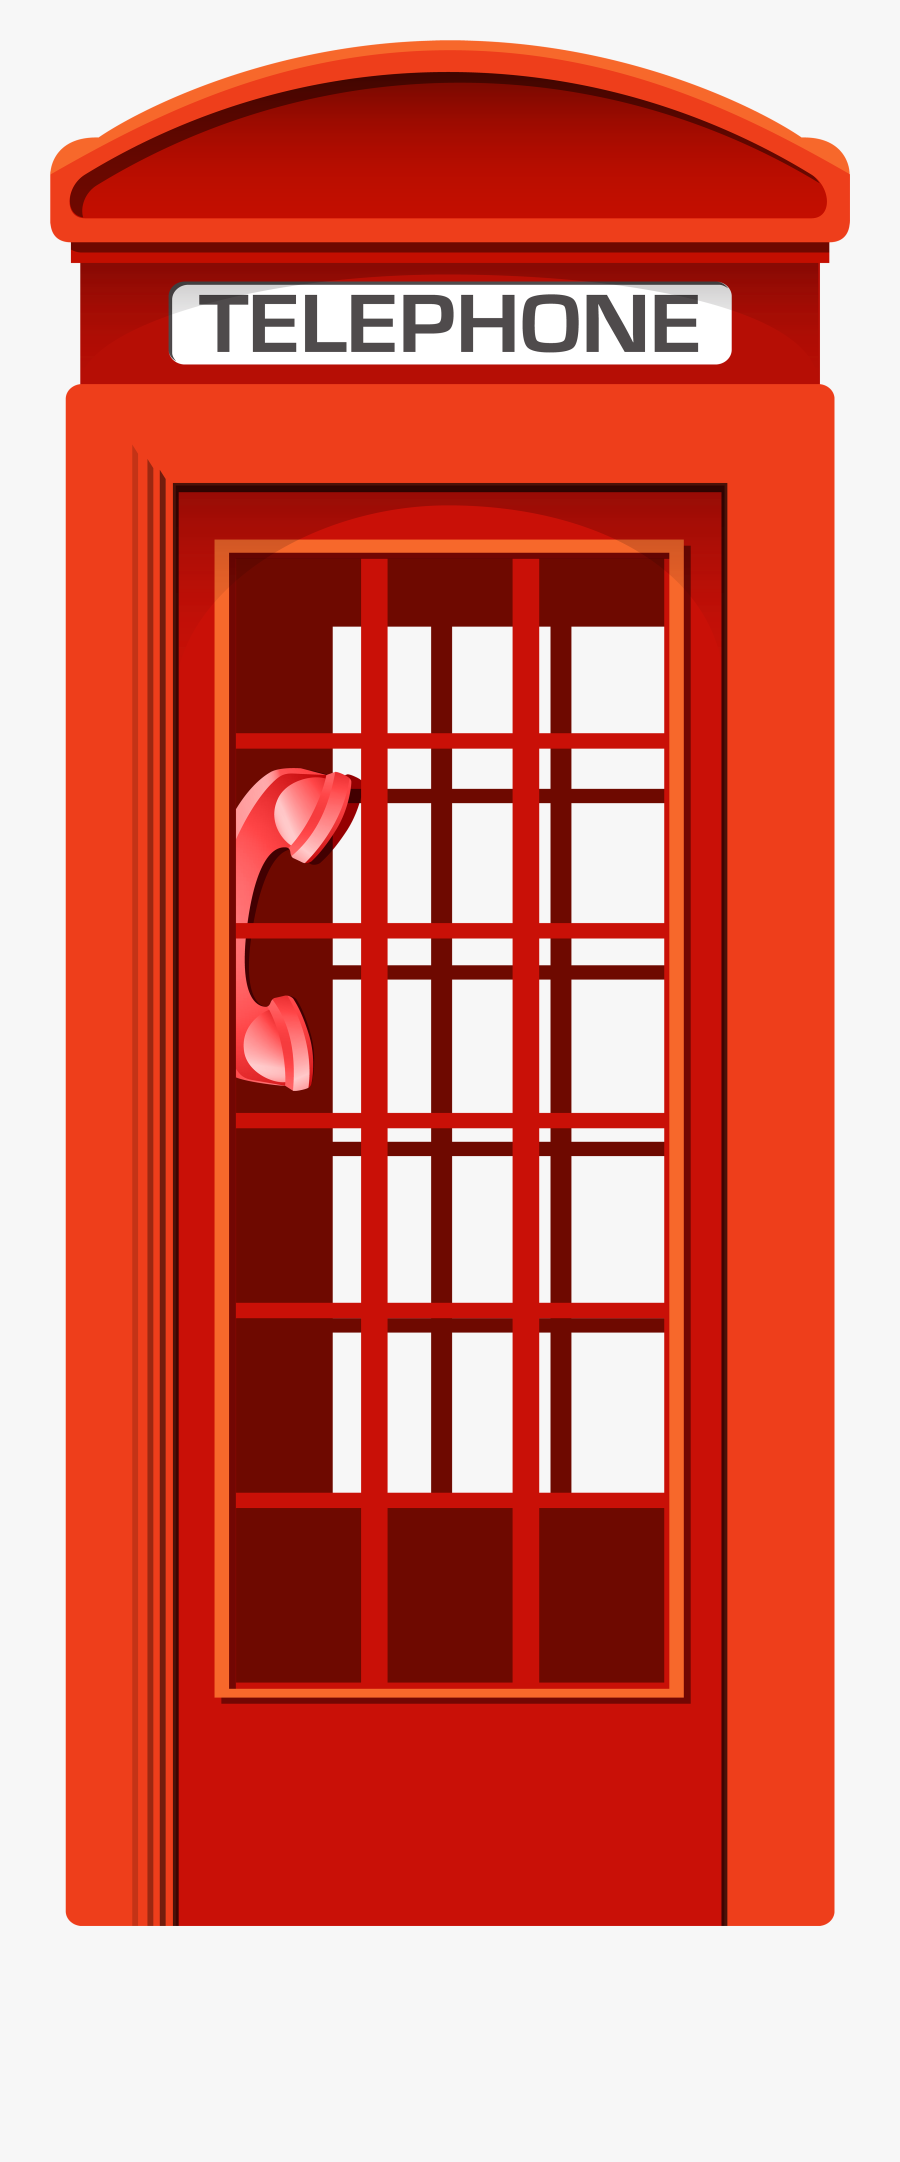 Photo Booth Png - Red Telephone Box Clipart, Transparent Clipart